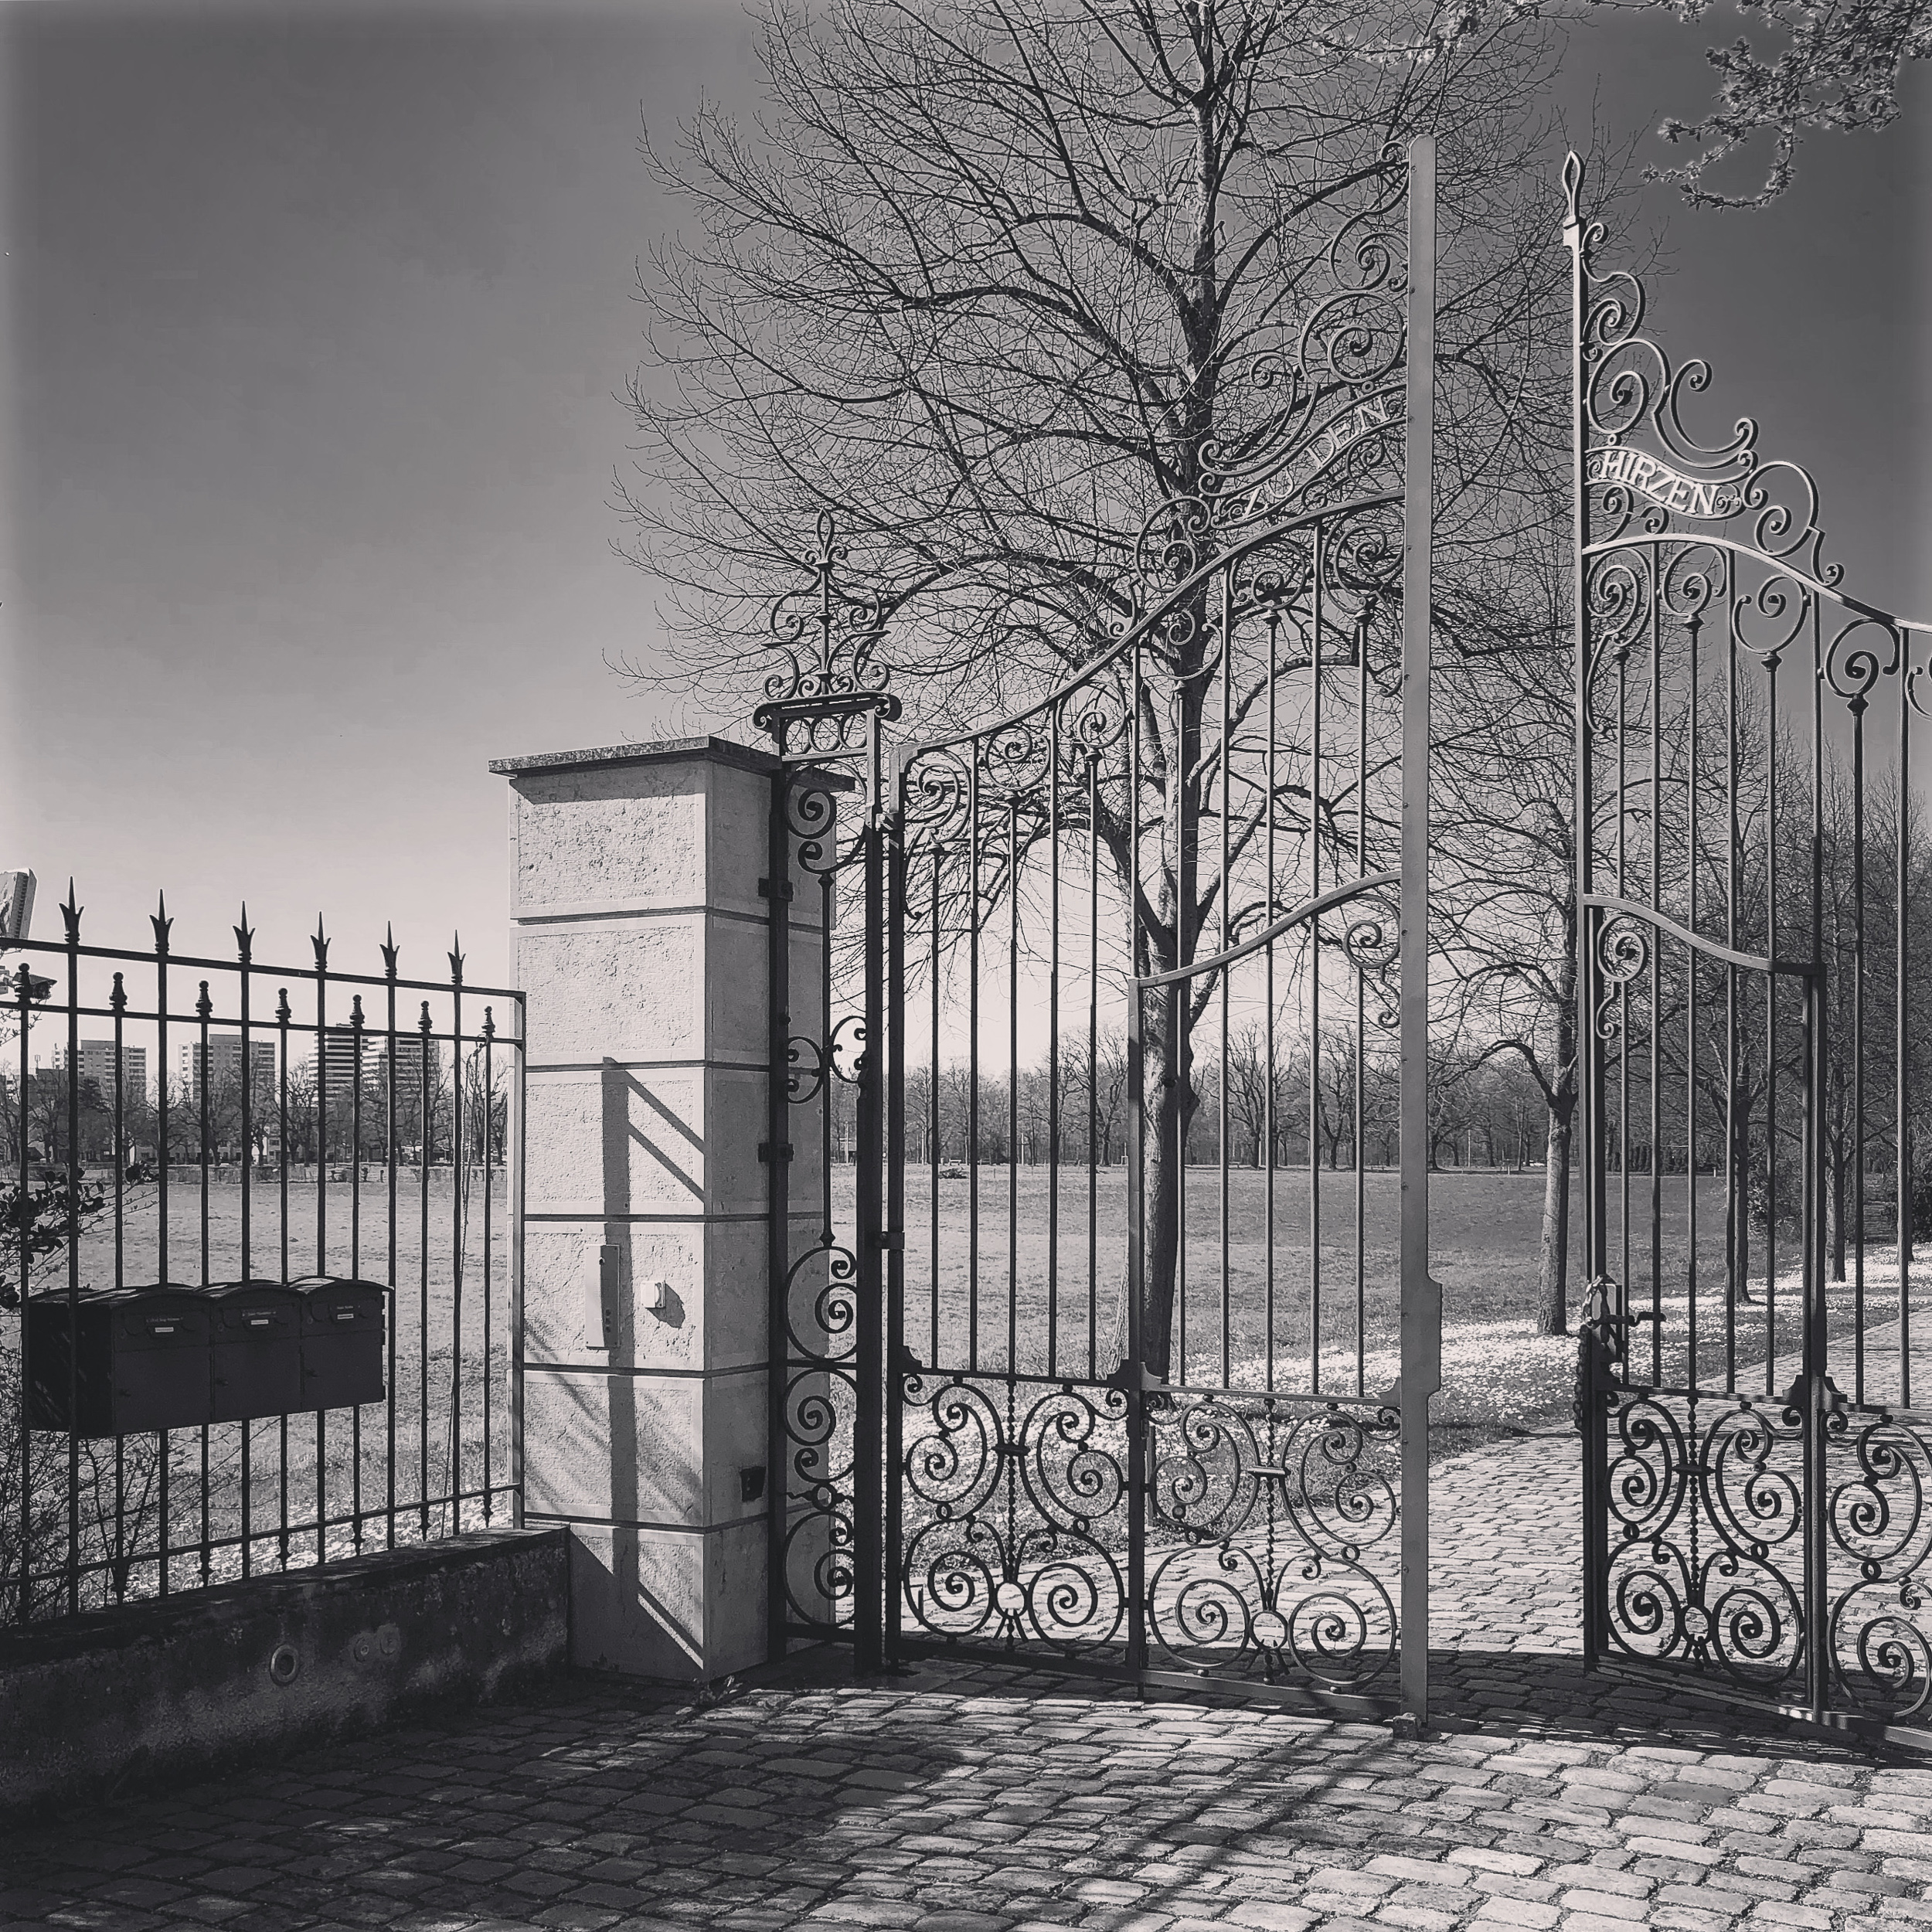 The open gate